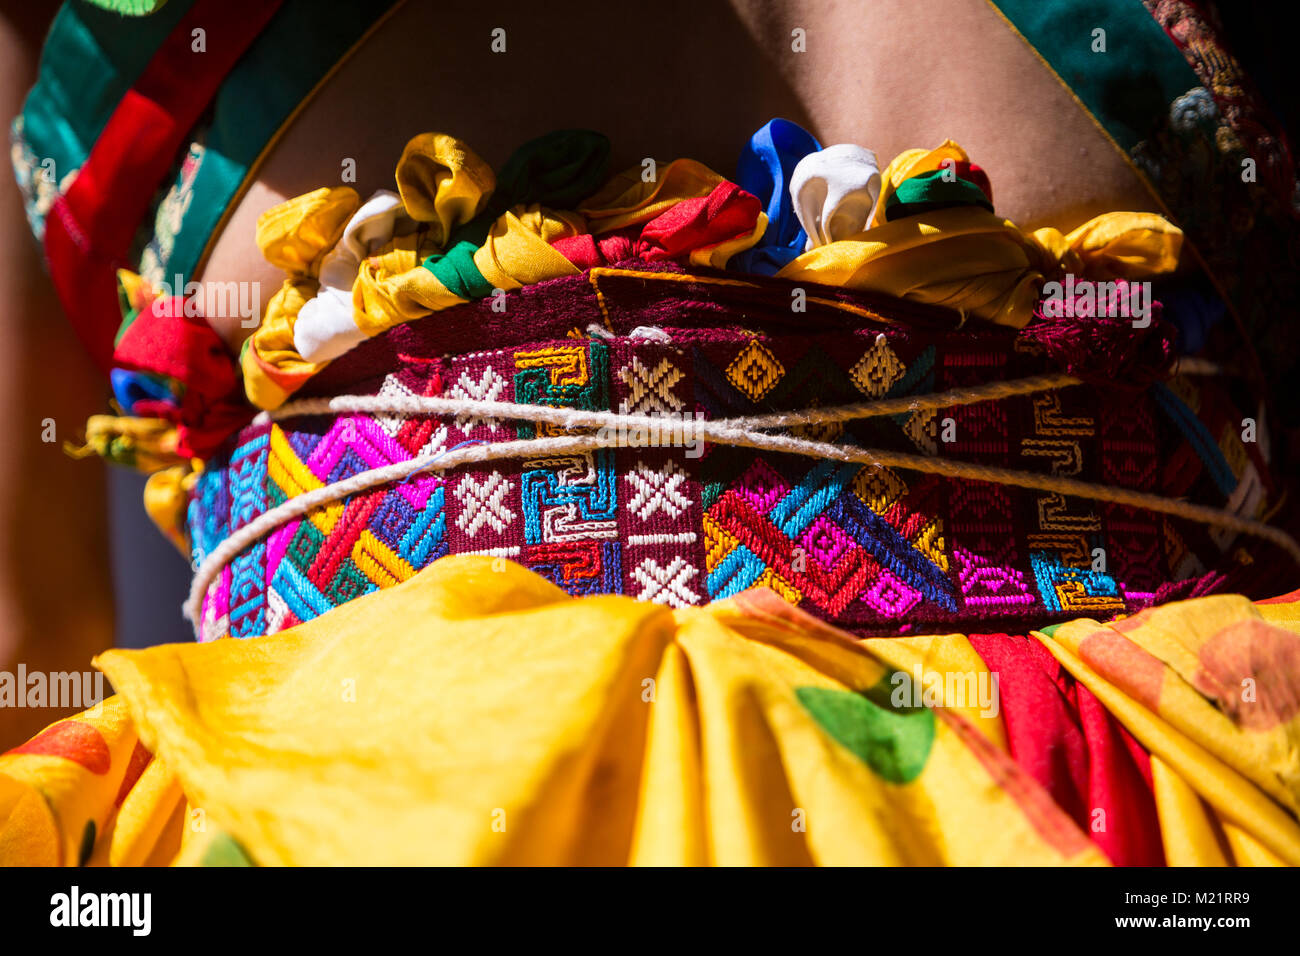 Prakhar Lhakhang, Bumthang, Bhutan.  Waistband of a   Buddhist Monk Performing a Dance in the Duechoed Religious Festival. Stock Photo